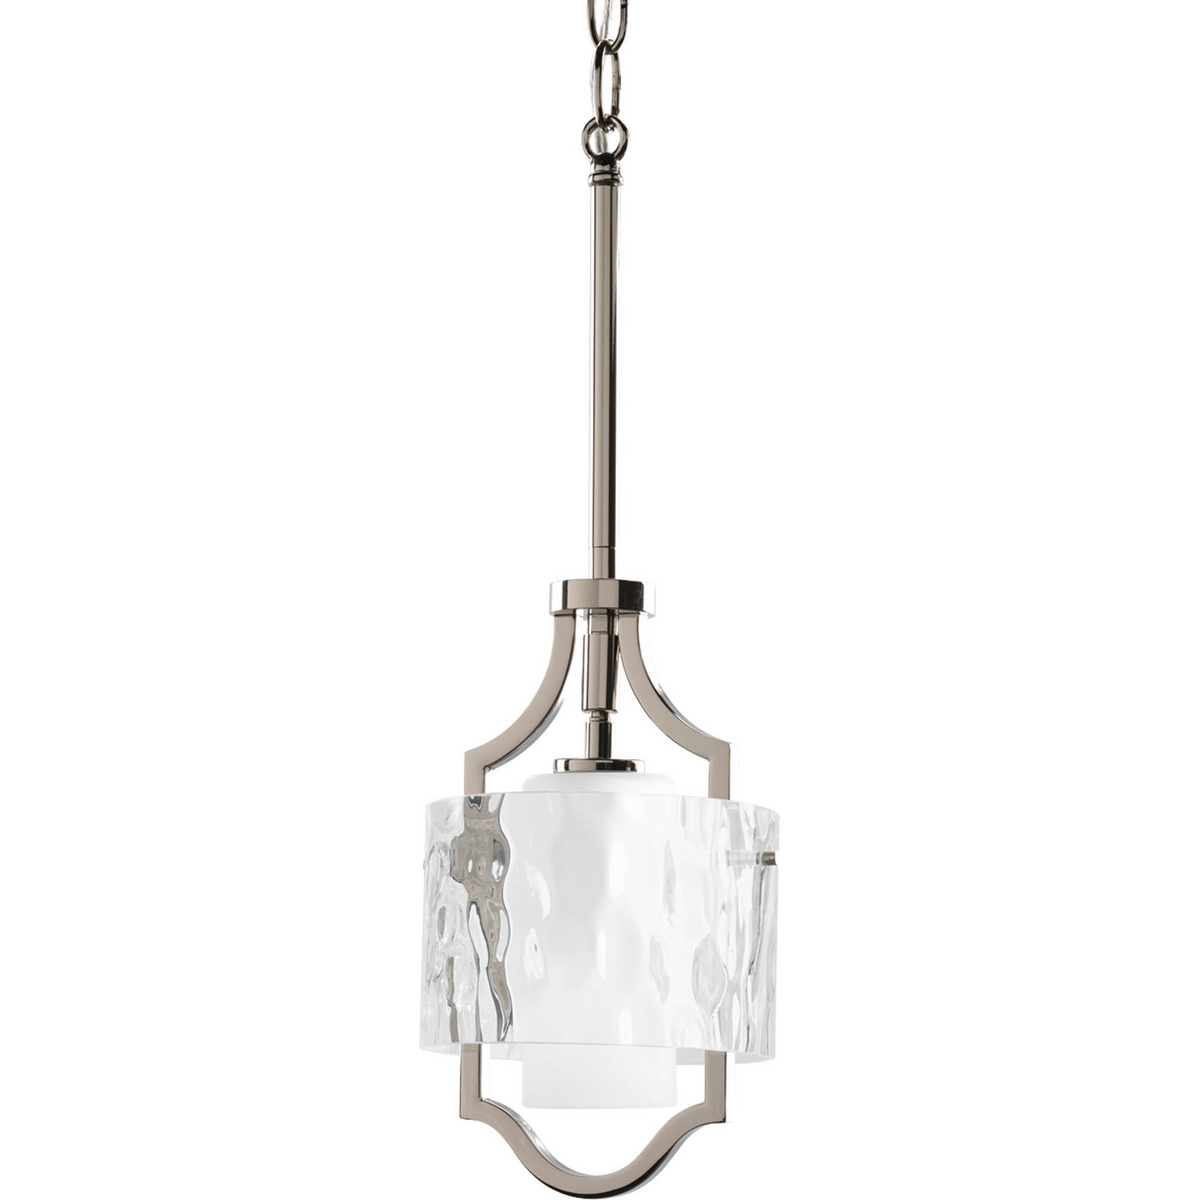 One-light pendant/semi-flush convertible fixture with bulb. Caress features a chic, sophisticated one-light semi-flush featuring a Polished Nickel metal frame with layered glass diffusers to cast a glimmering light. An outer shade of clear, water gla...